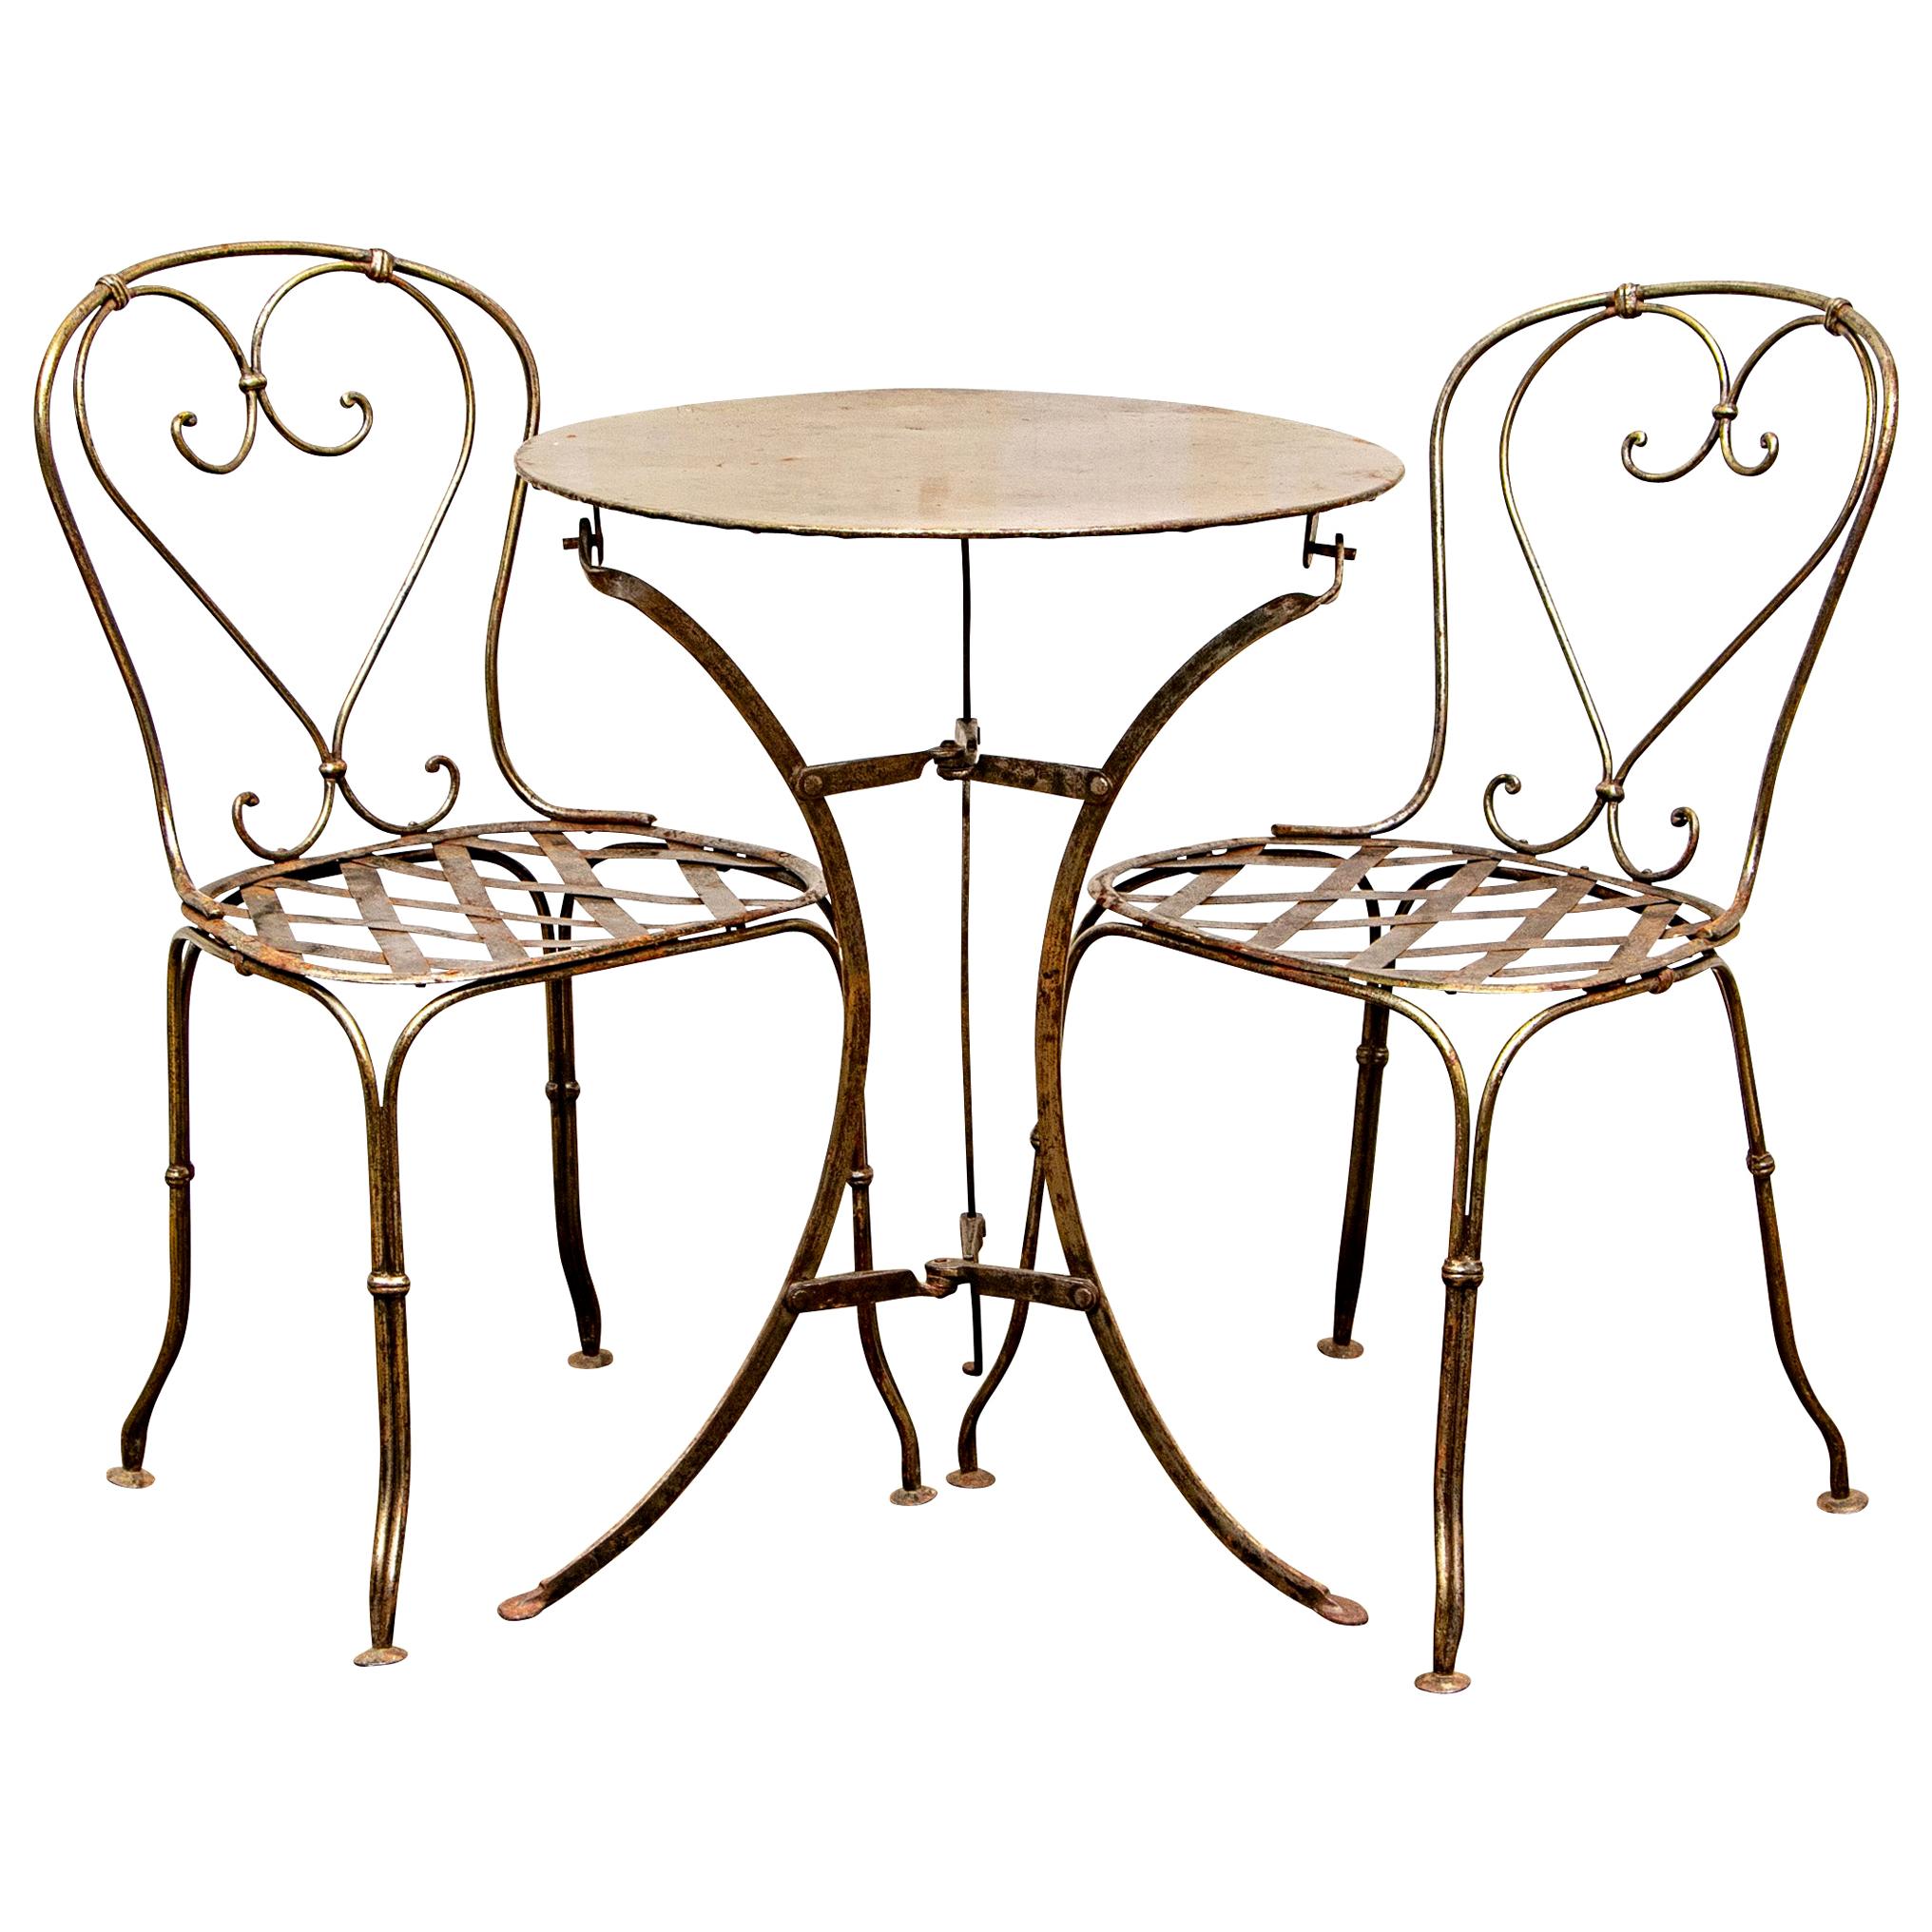 Antique French Handwrought Iron Table and Two Chairs